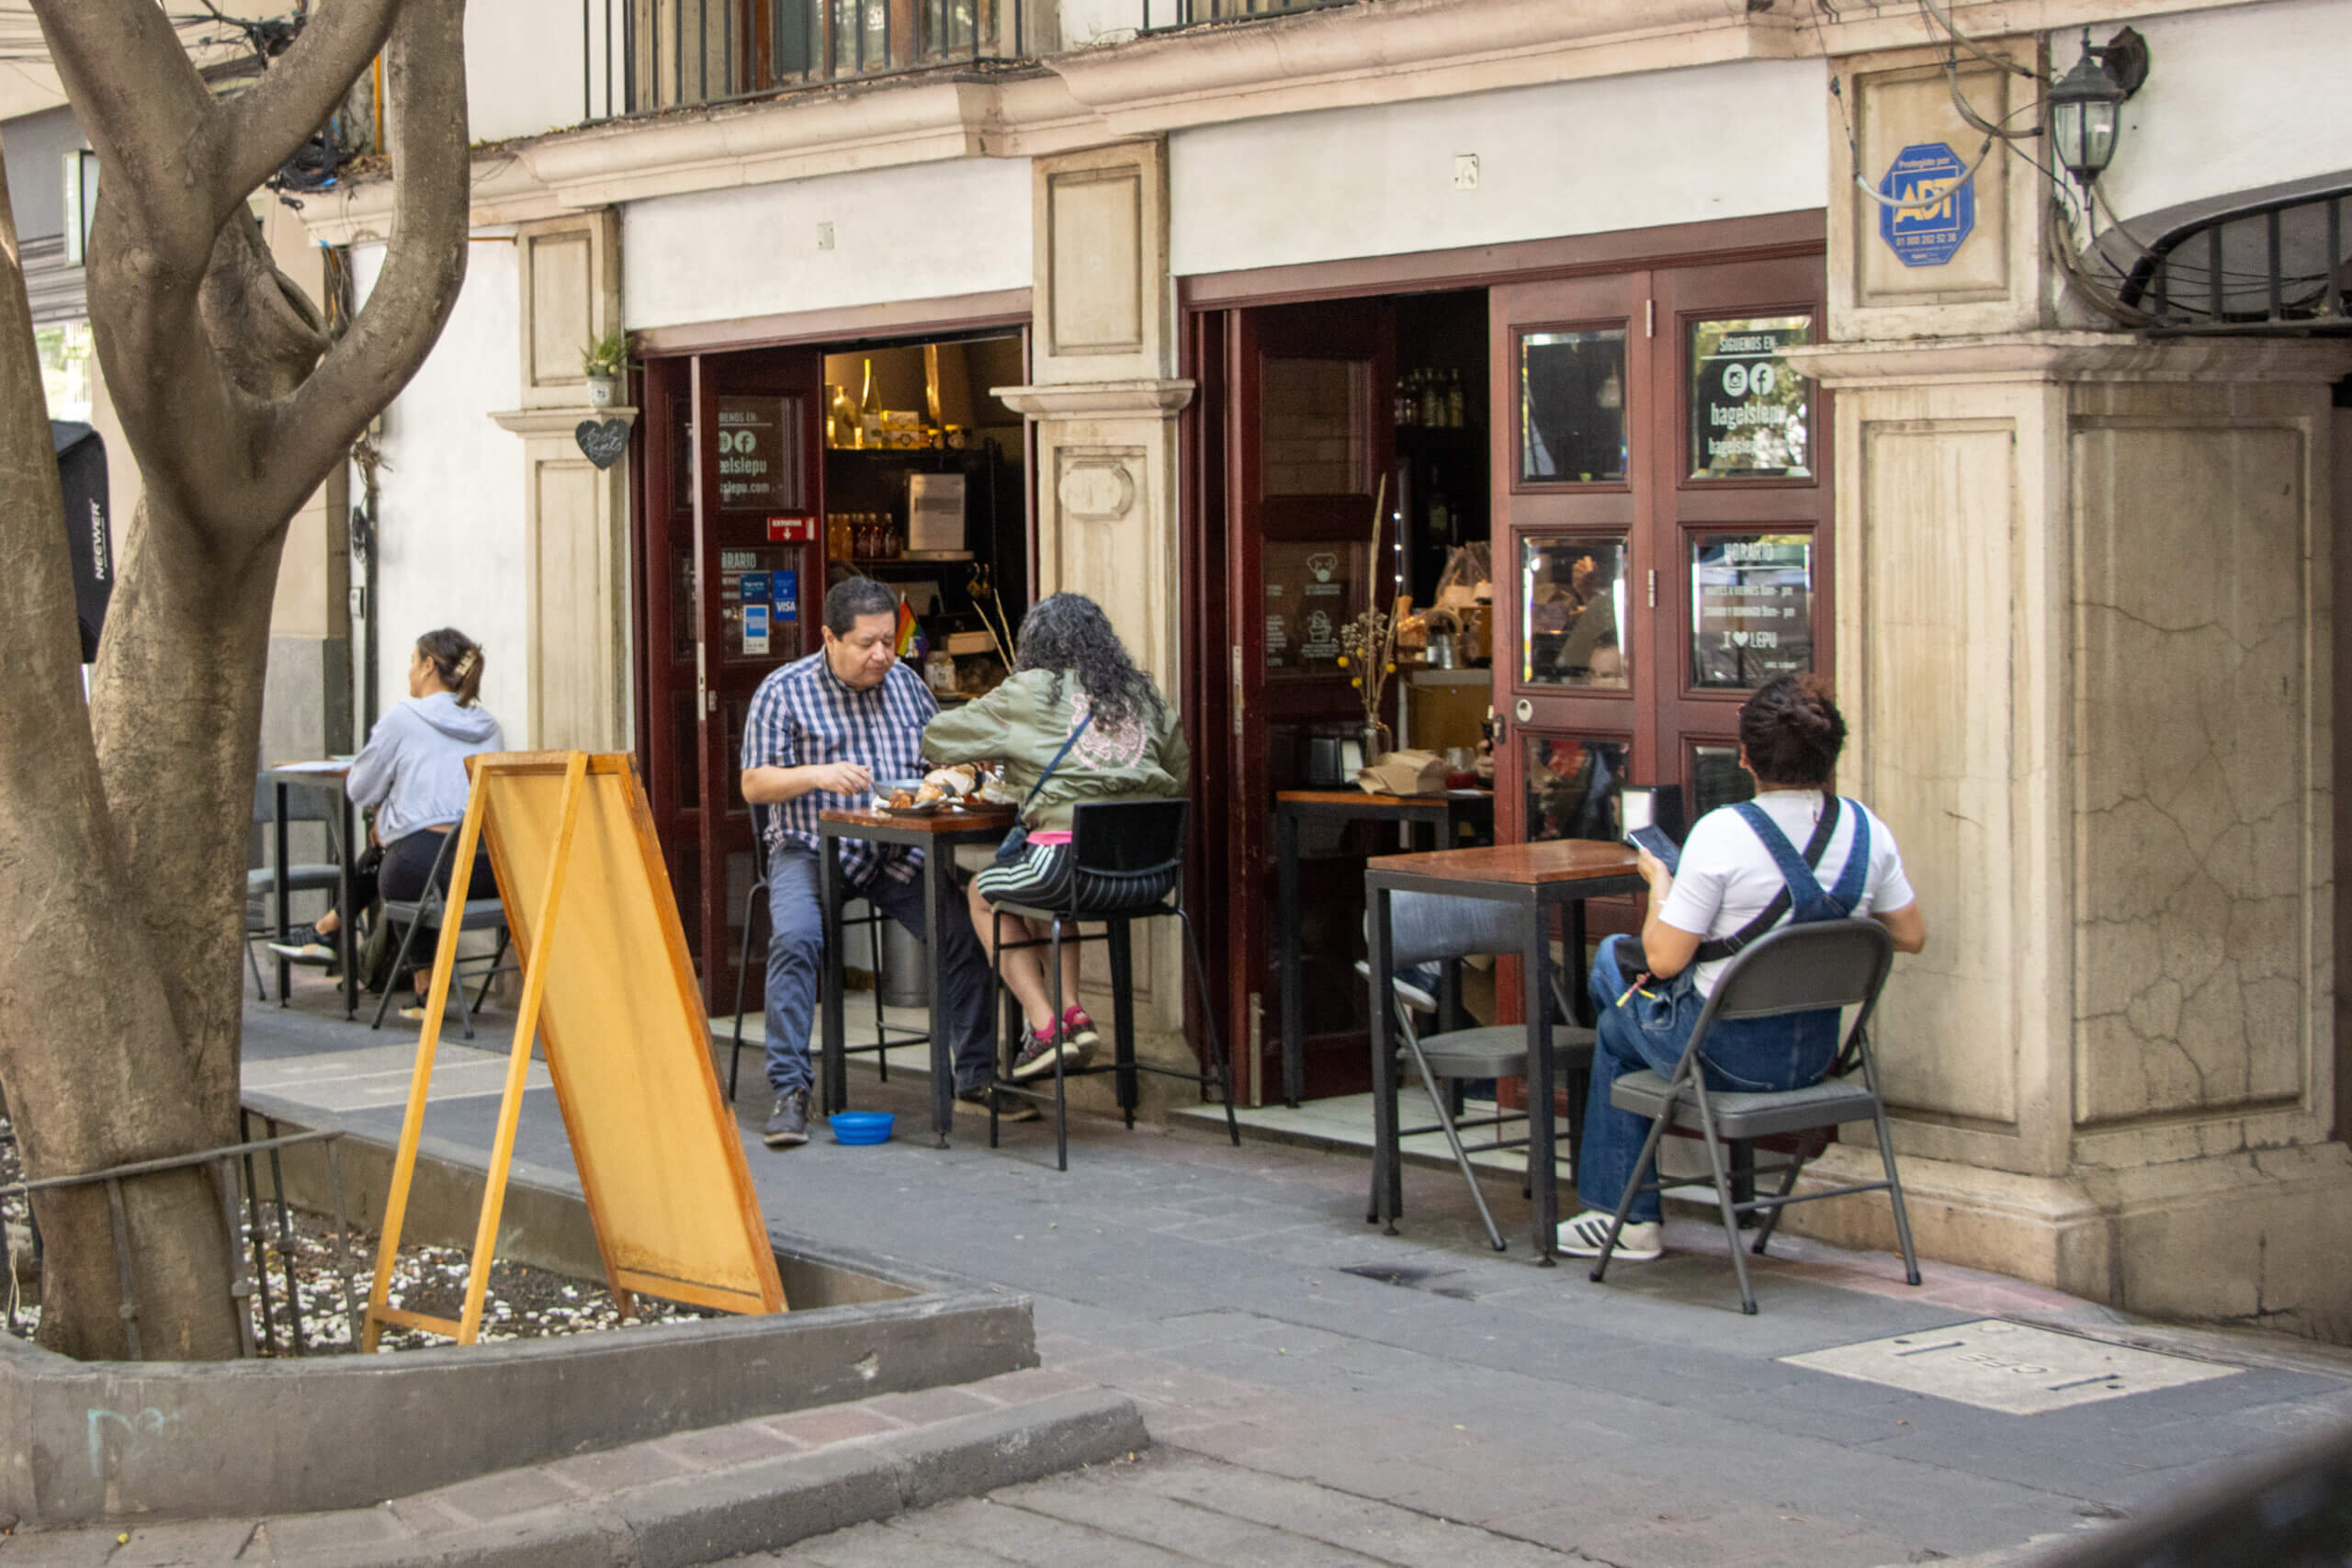 People sit at high tables on the sidewalk in front of a storefront with carved stone pillars and wooden french doors.